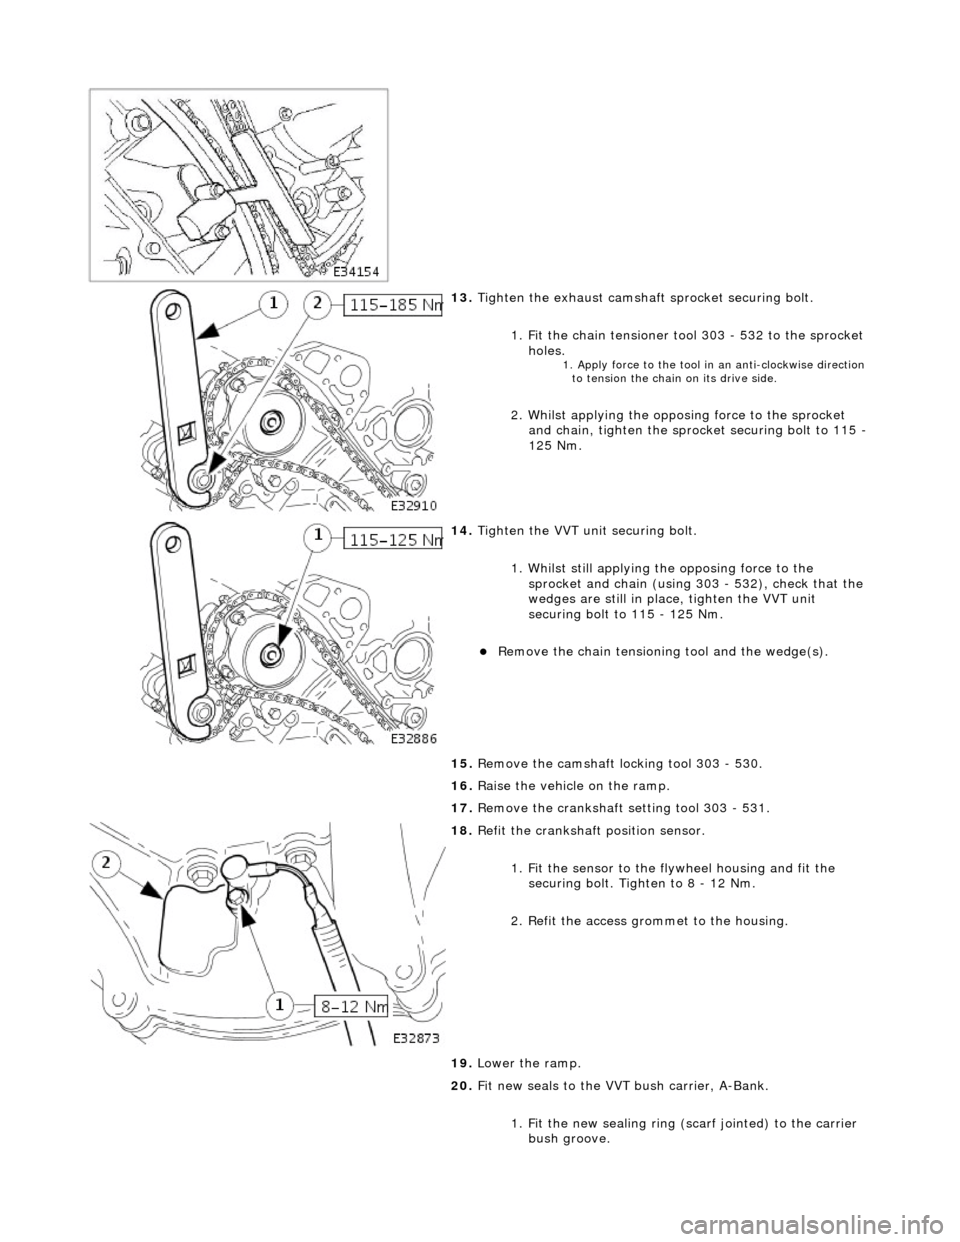 JAGUAR X308 1998 2.G Workshop Manual  
 
13. Tigh
 ten the exhaust camshaft
 sprocket securing bolt. 
1. Fit the chain tensioner tool 303 - 532 to the sprocket  holes. 
1. Apply force to the  to
 ol in
 an anti-clockwise direction 
to te